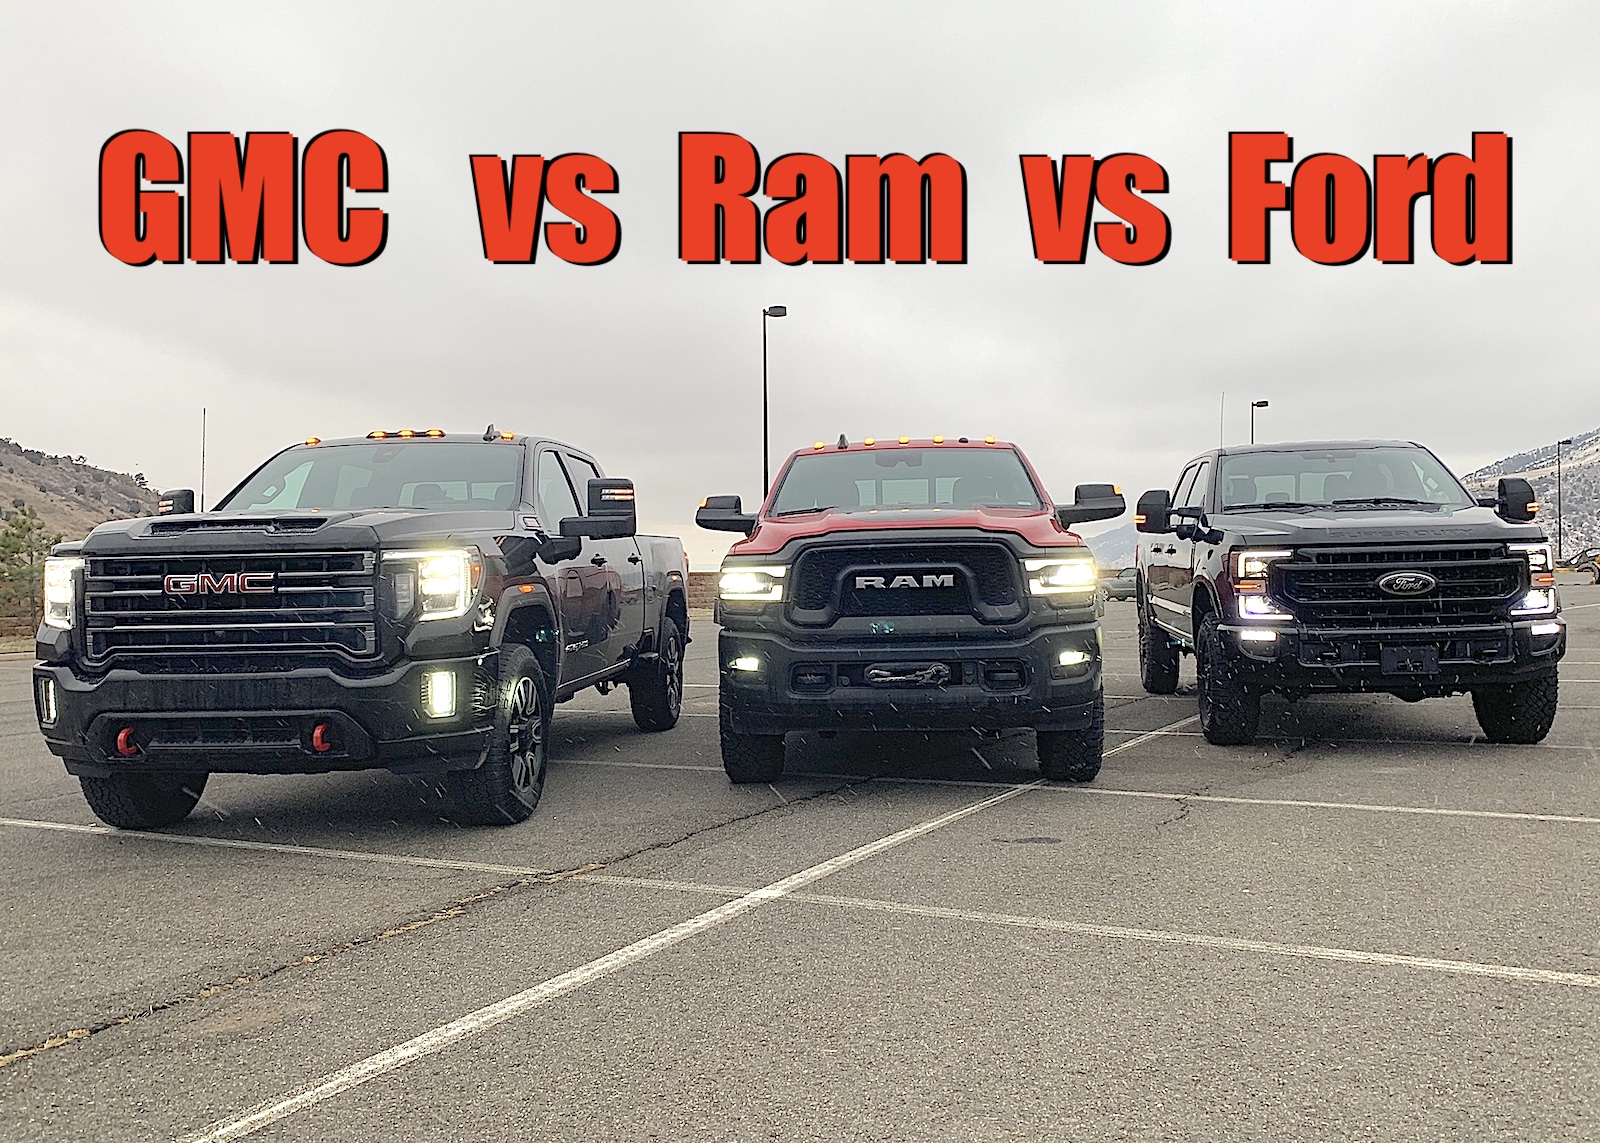 2020 Ford Tremor vs 2020 GMC HD AT4 vs 2020 Ram Power Wagon Which Is